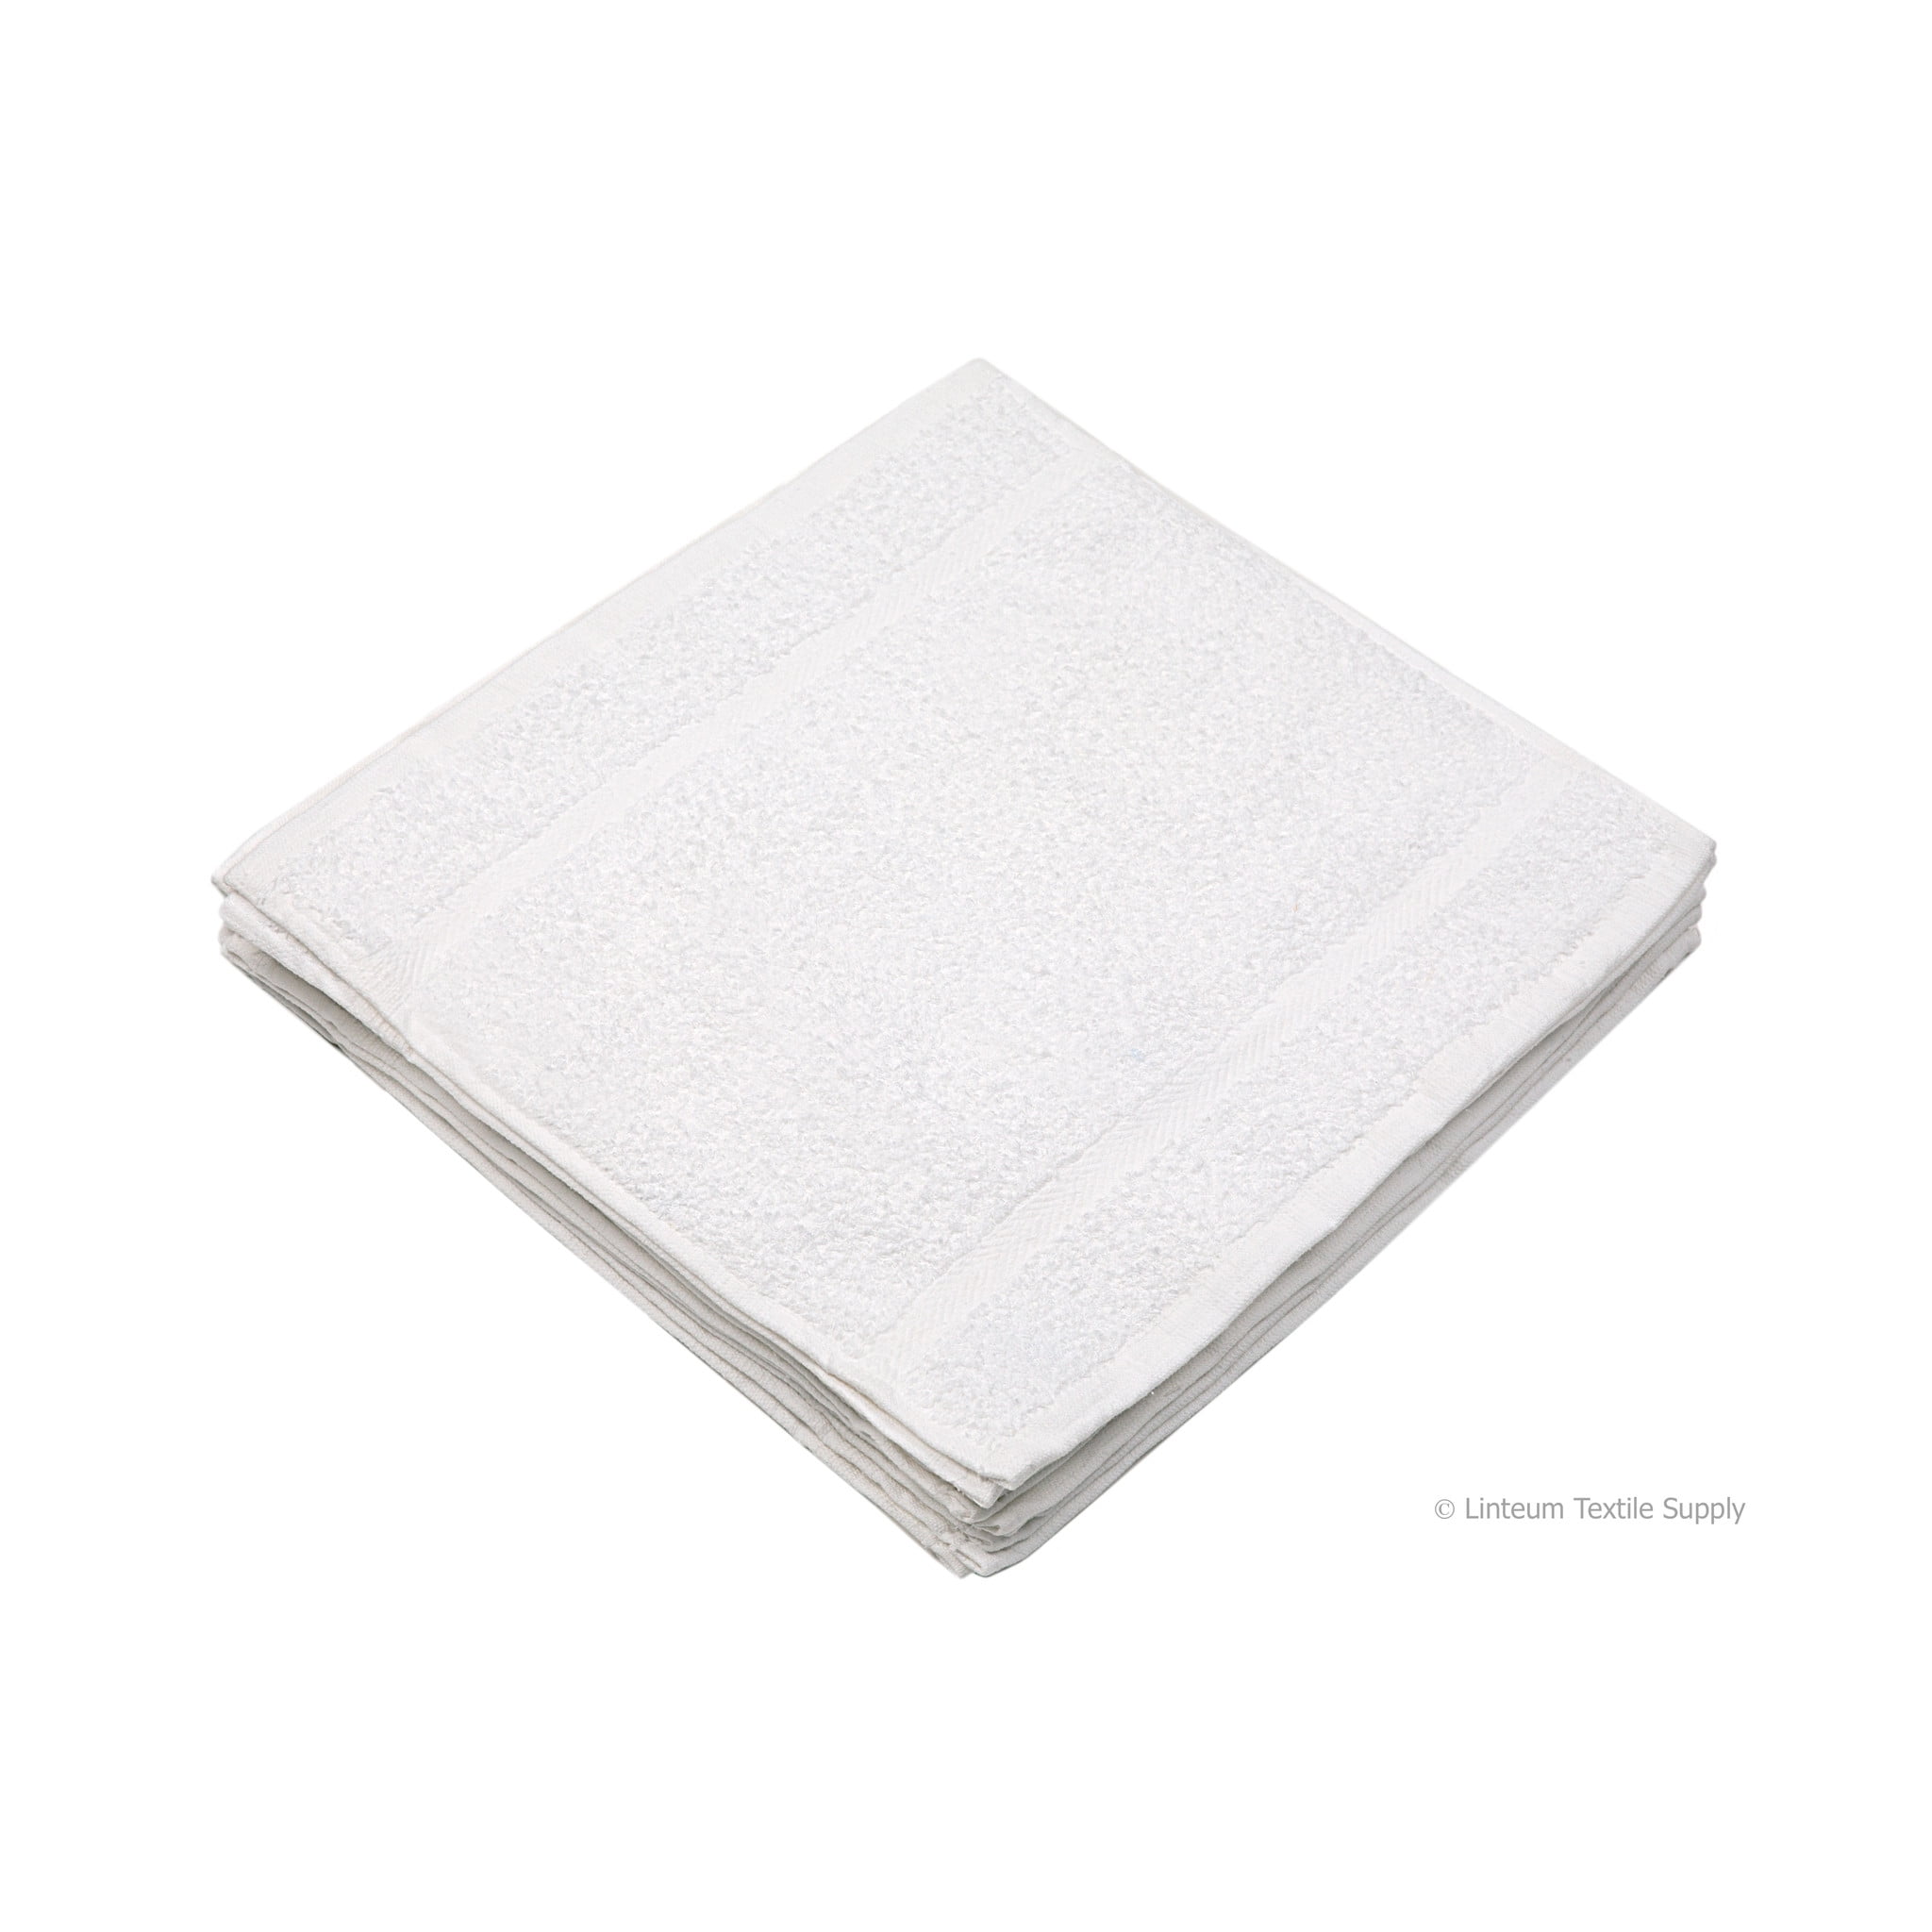 Bulk Spa White Washcloths – 96 Pack – Size 12” x 12” – Thick Loop Pile Washcloth – Absorbent and Soft 100% Ring-Spun Cotton Wash Cloth – Lint Free